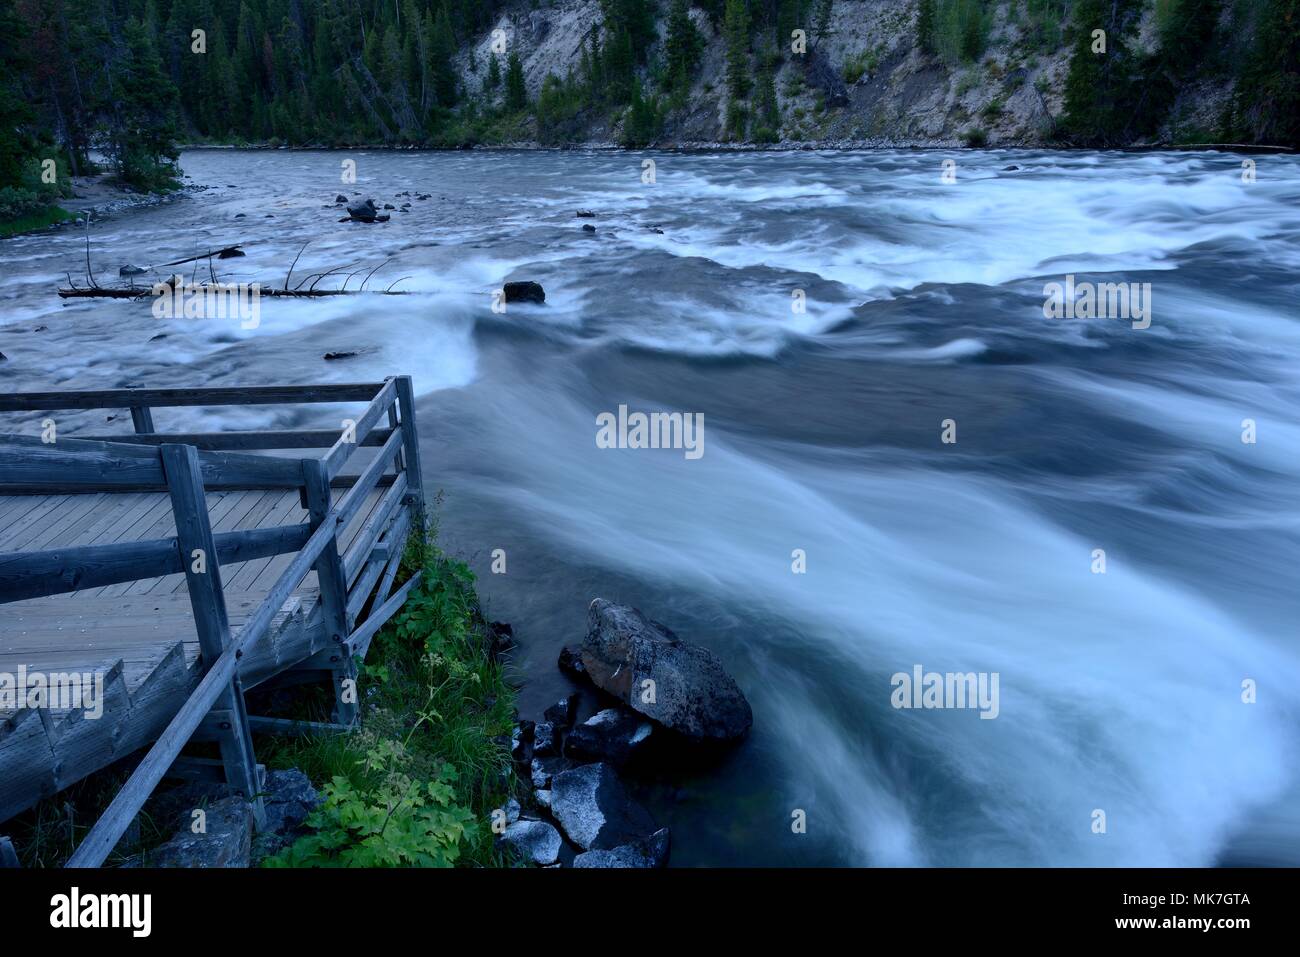 Night at Yellowstone River - Night view of the Yellowstone River at LeHardy Rapids, Yellowstone National Park, Wyoming, USA. Stock Photo